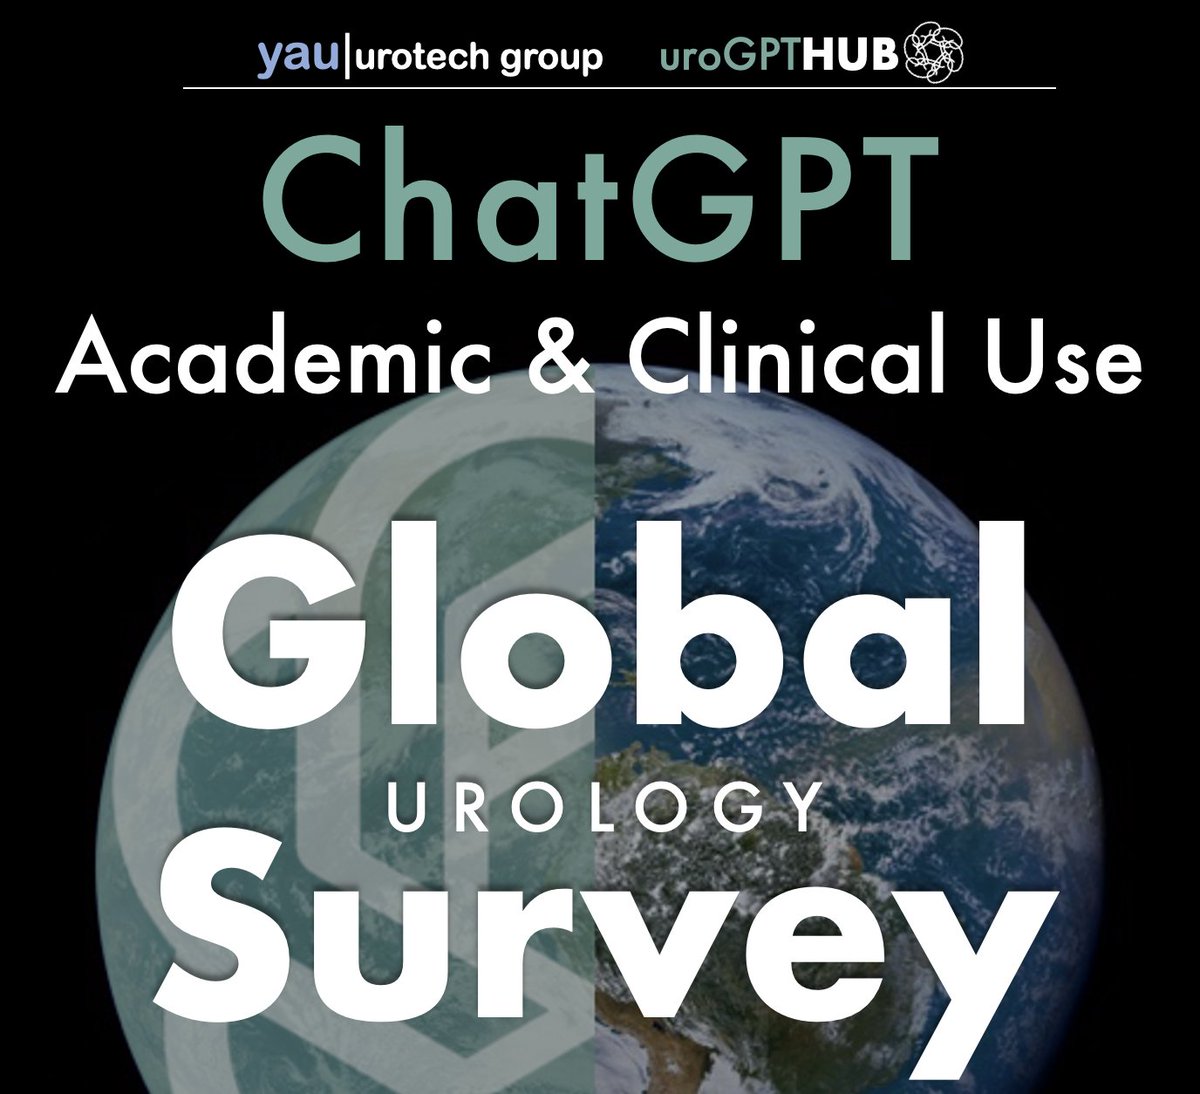 🚨Calling all #urology friends👩‍⚕️👨‍⚕️! Join us in assessing #ChatGPT's impact on academic🎓and clinical settings🩺by taking this survey. Want to stay updated on @uroGPT initiatives? Provide your contact info at the survey's end! 🔗Fill out the survey now: surveymonkey.com/r/CCWVVDR